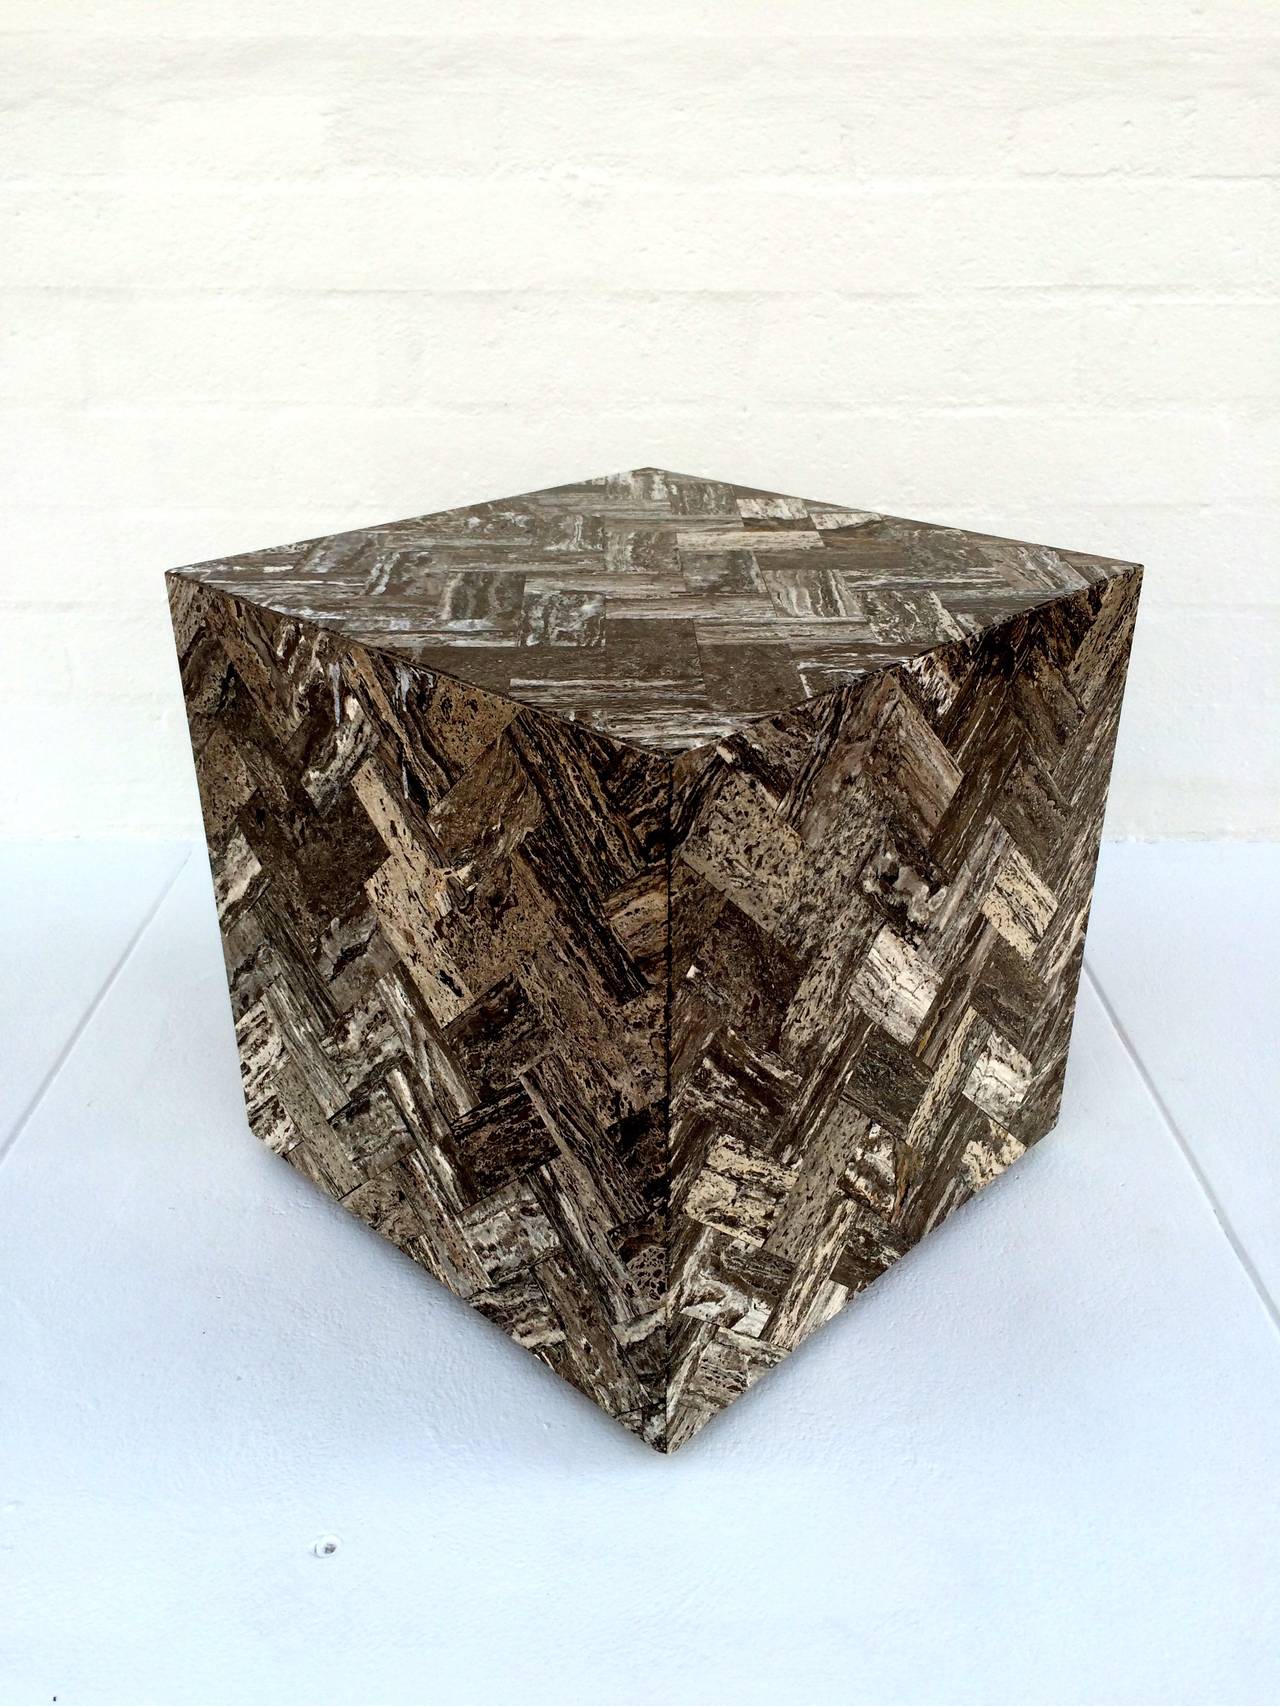 A gorgeous sealed travertine cube.
Has hidden wheels to make moving around easy.
The geo metric pattern makes for a wonderful eye pleasing addition to any space.
circa 1970s.
The cube is 18